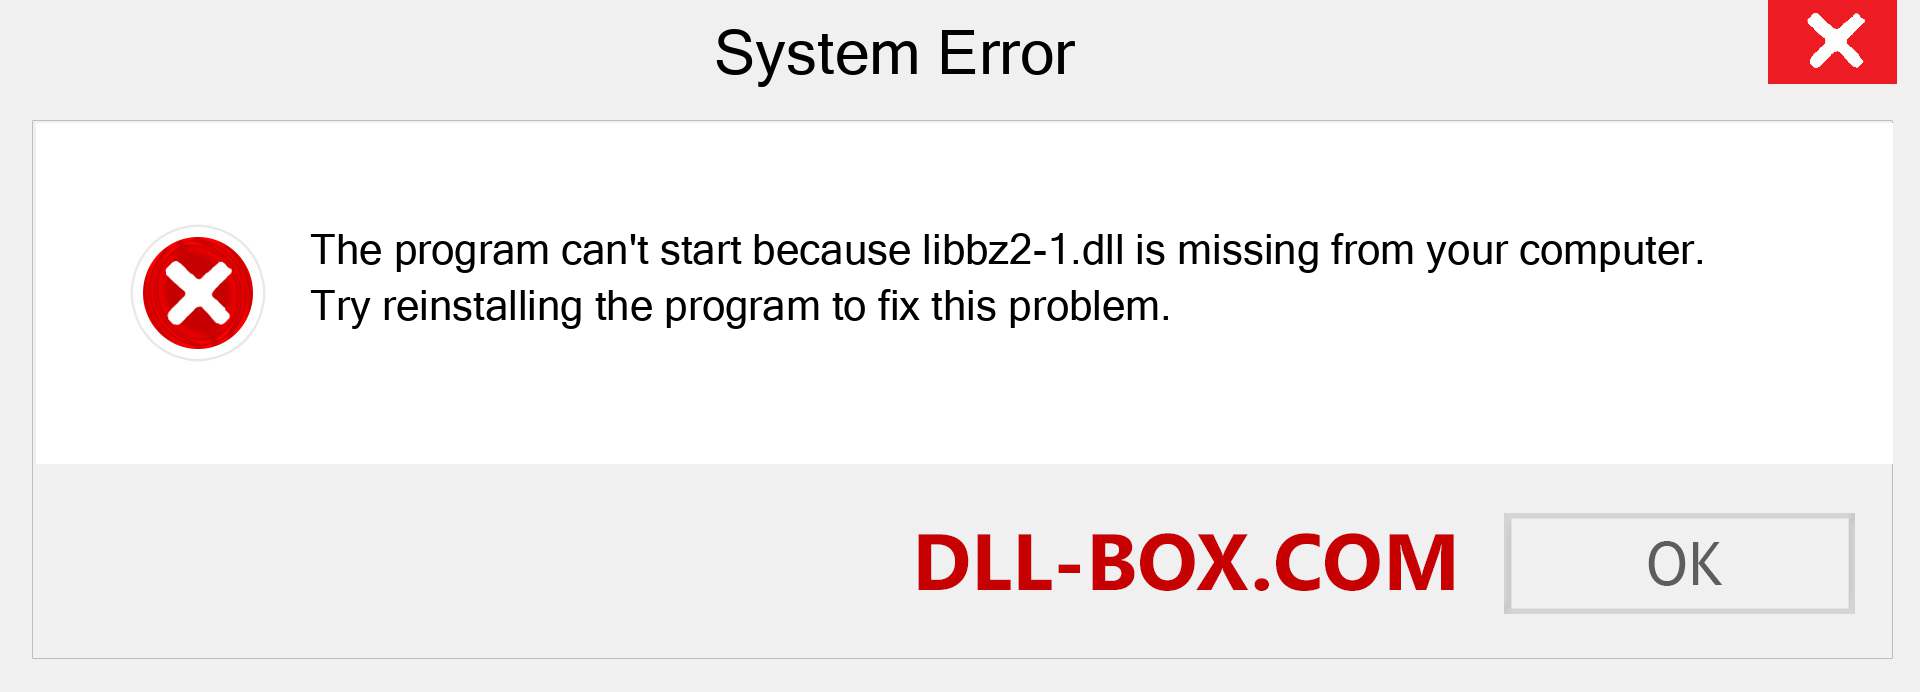  libbz2-1.dll file is missing?. Download for Windows 7, 8, 10 - Fix  libbz2-1 dll Missing Error on Windows, photos, images